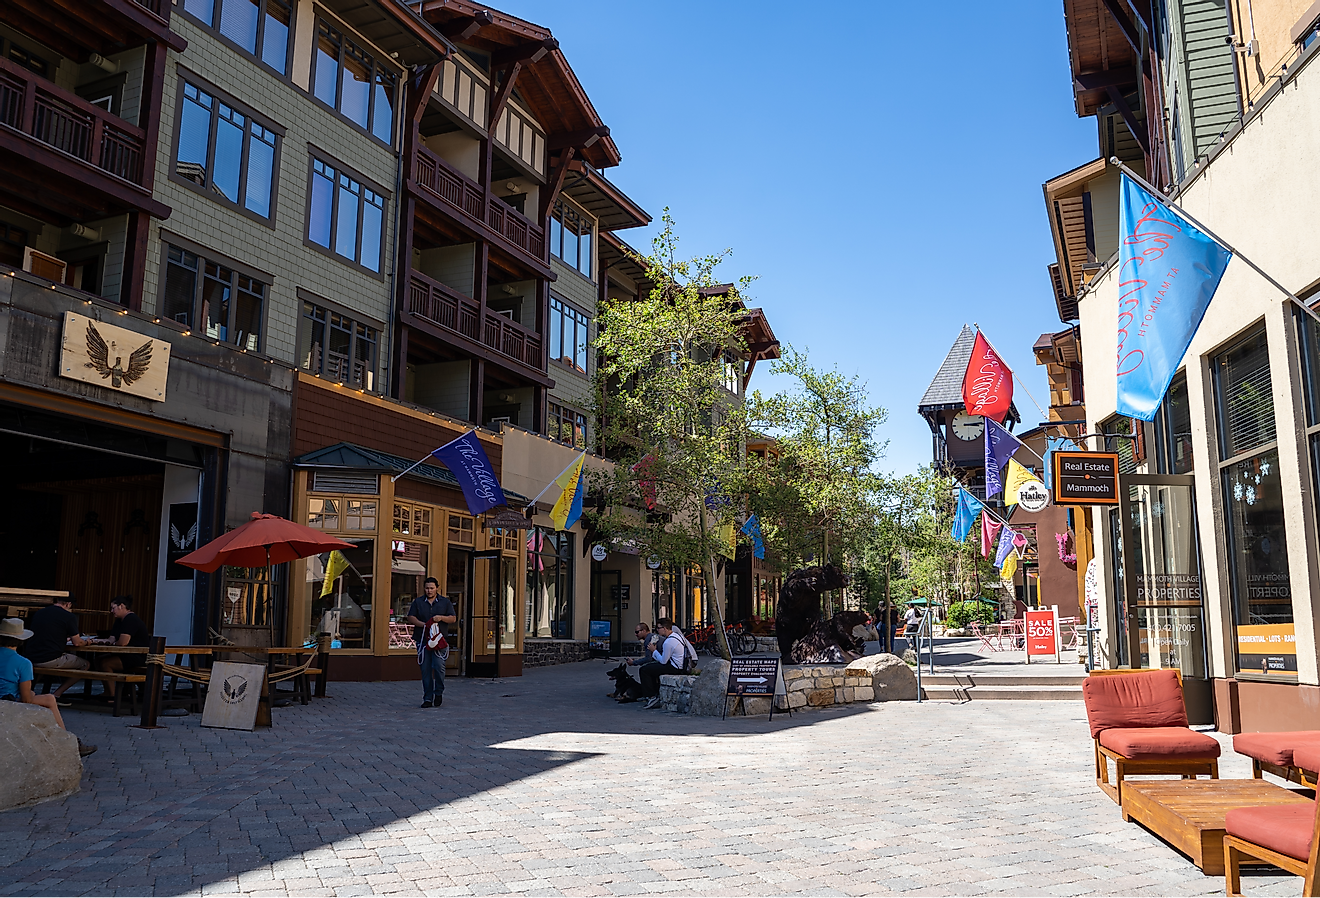 A pedestrian friendly shopping area with restaurants in Mammoth Lakes in the summer. Image credit melissamn via Shutterstock.com